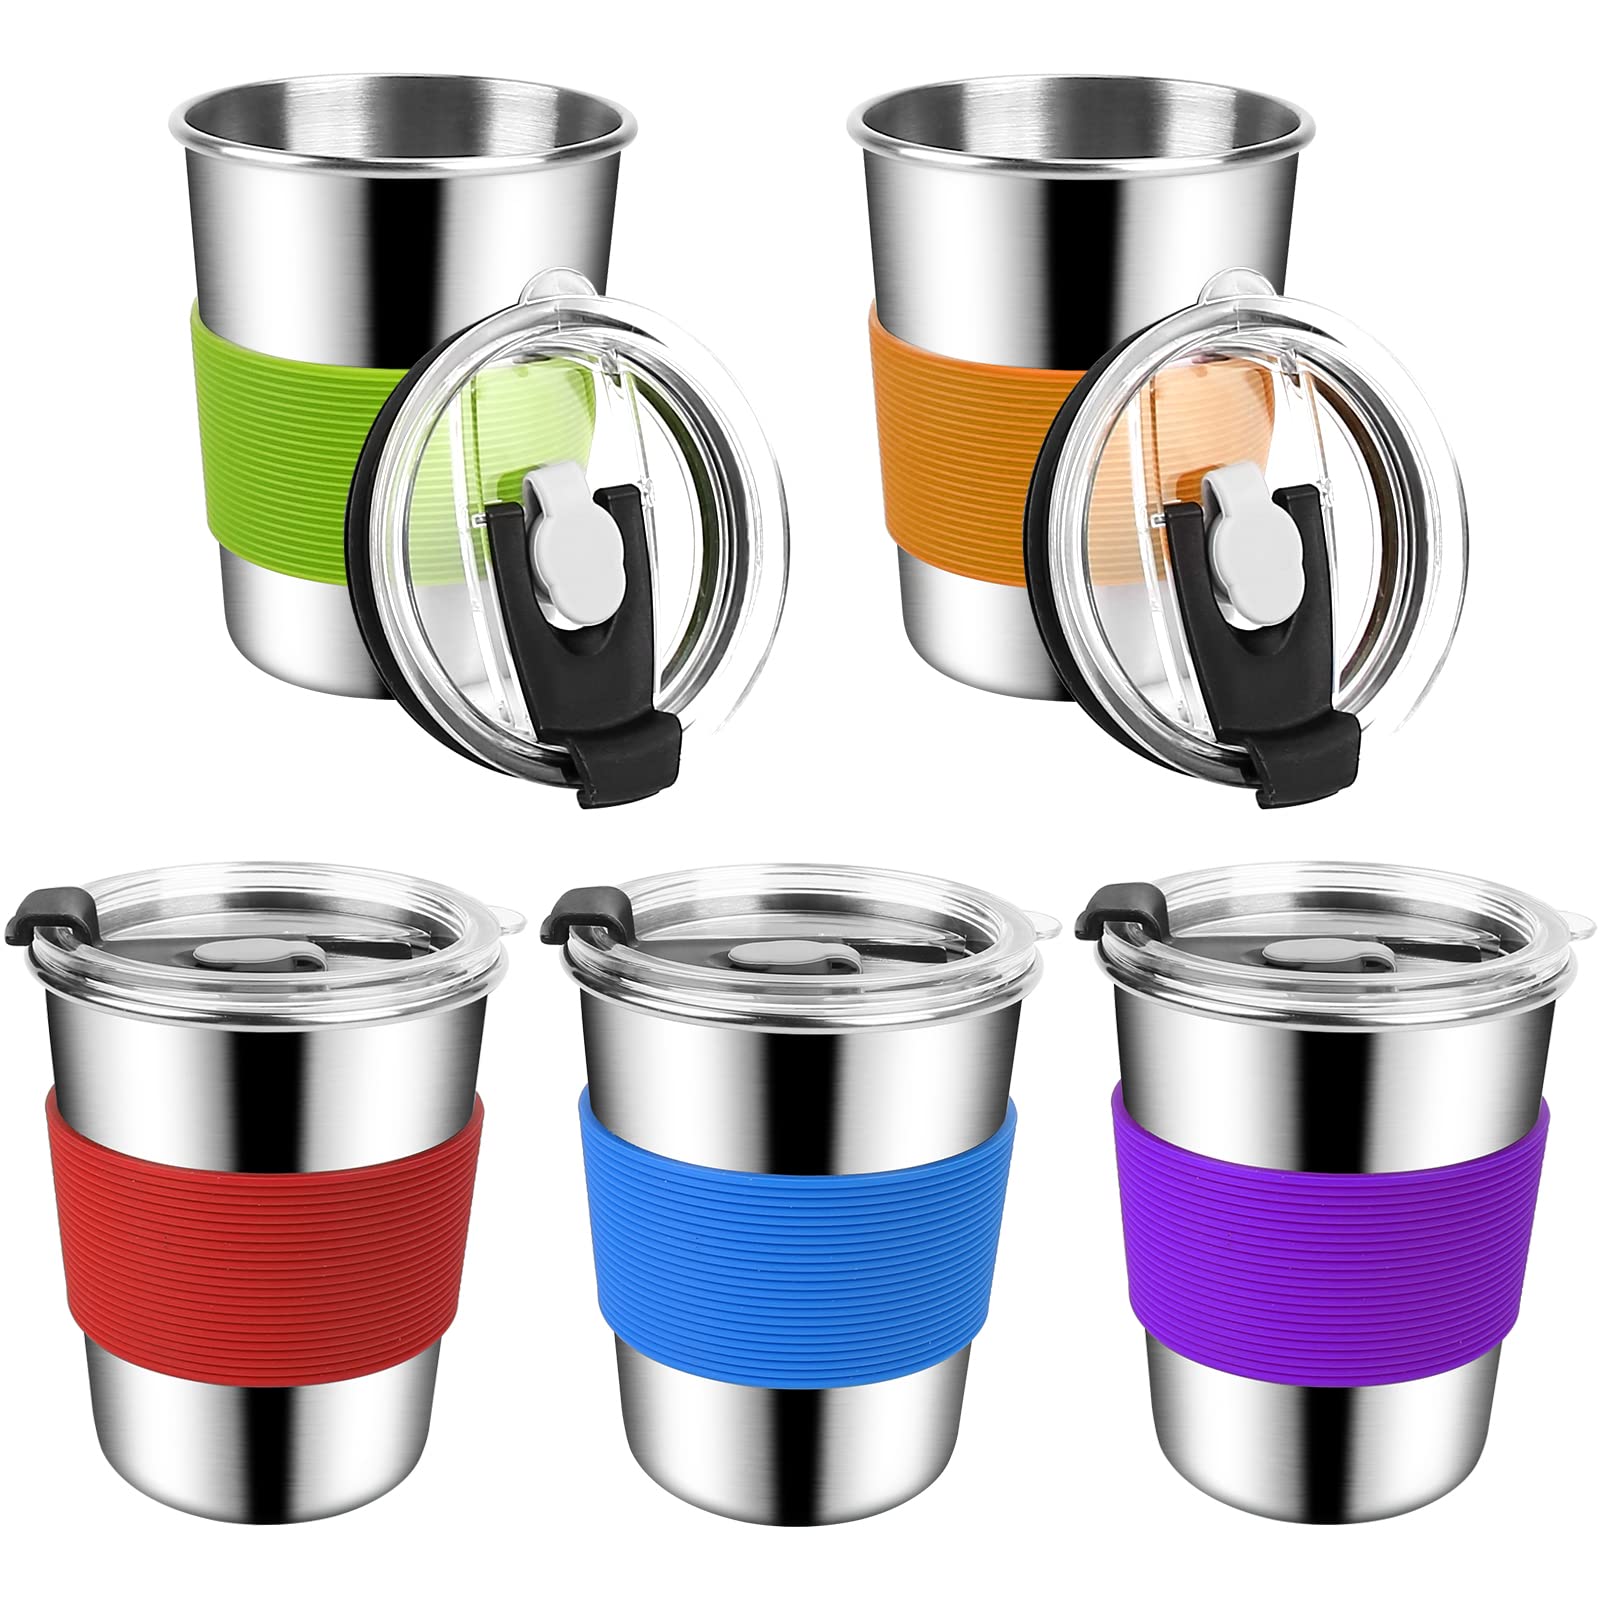 ShineMe 8oz Kids Cups Spill Proof 5pack Stainless Steel Sippy Cups